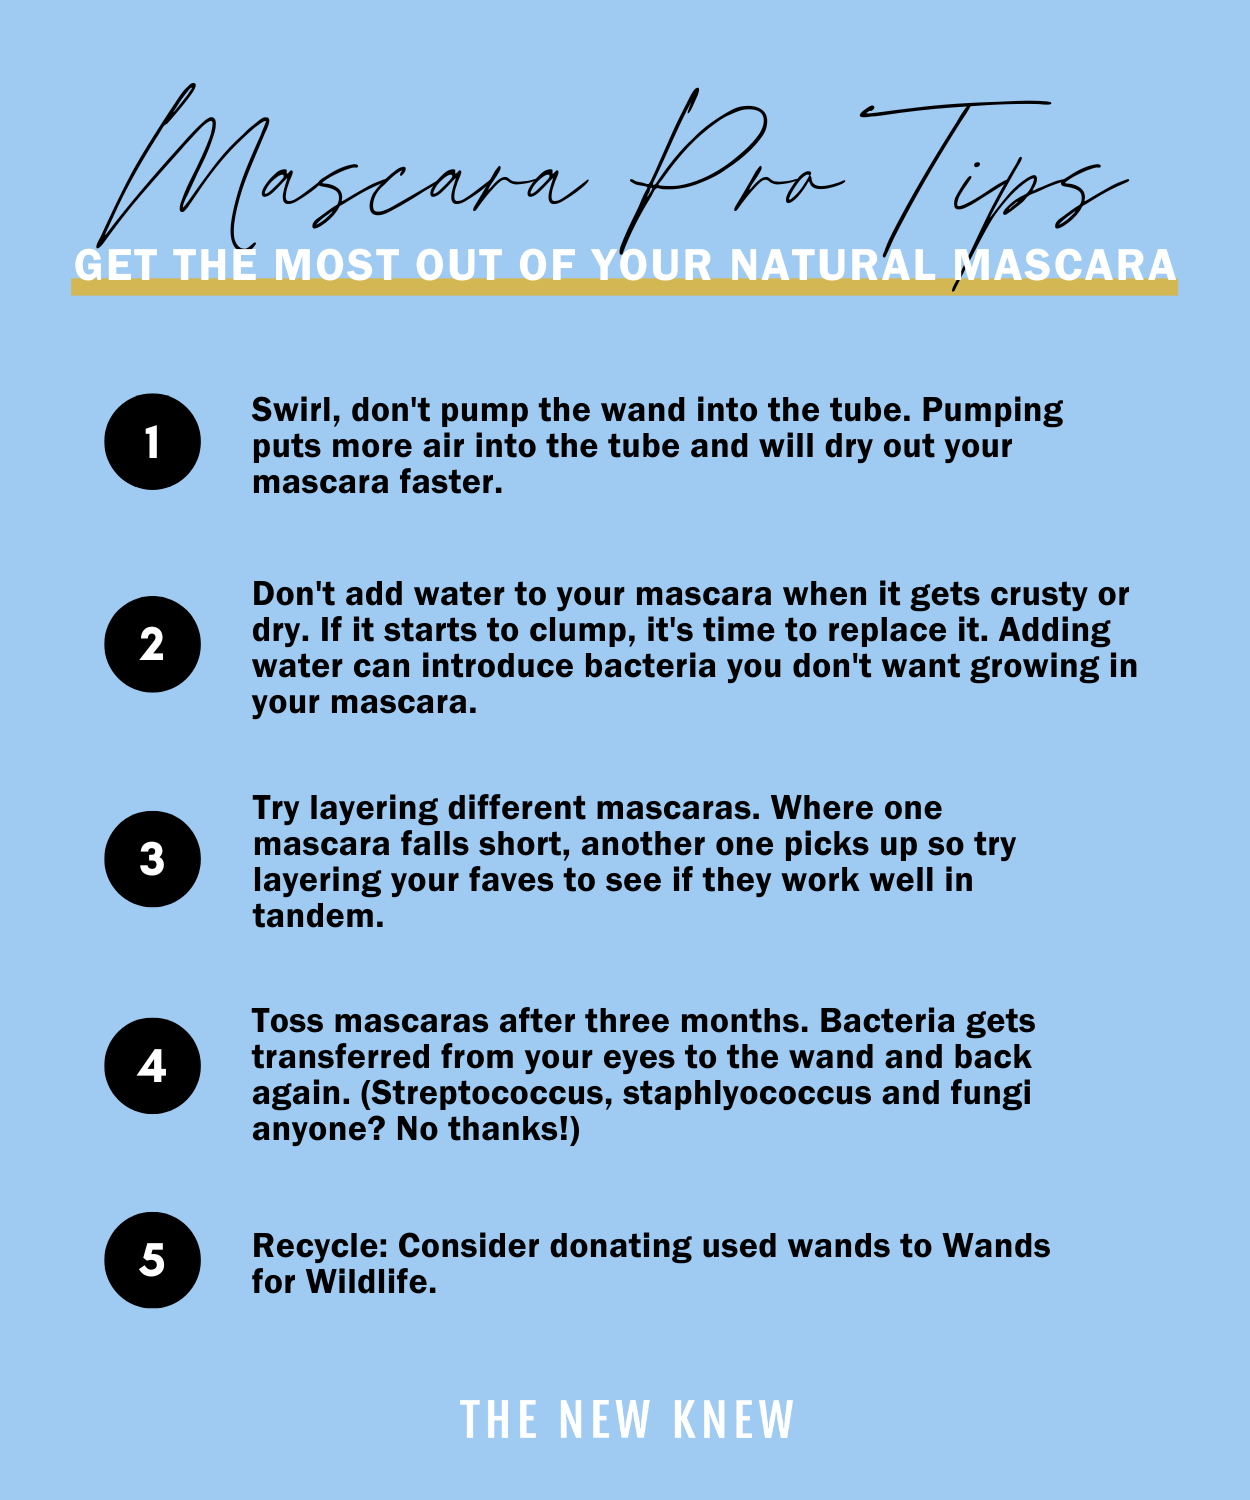 A listing of tips for using mascara.